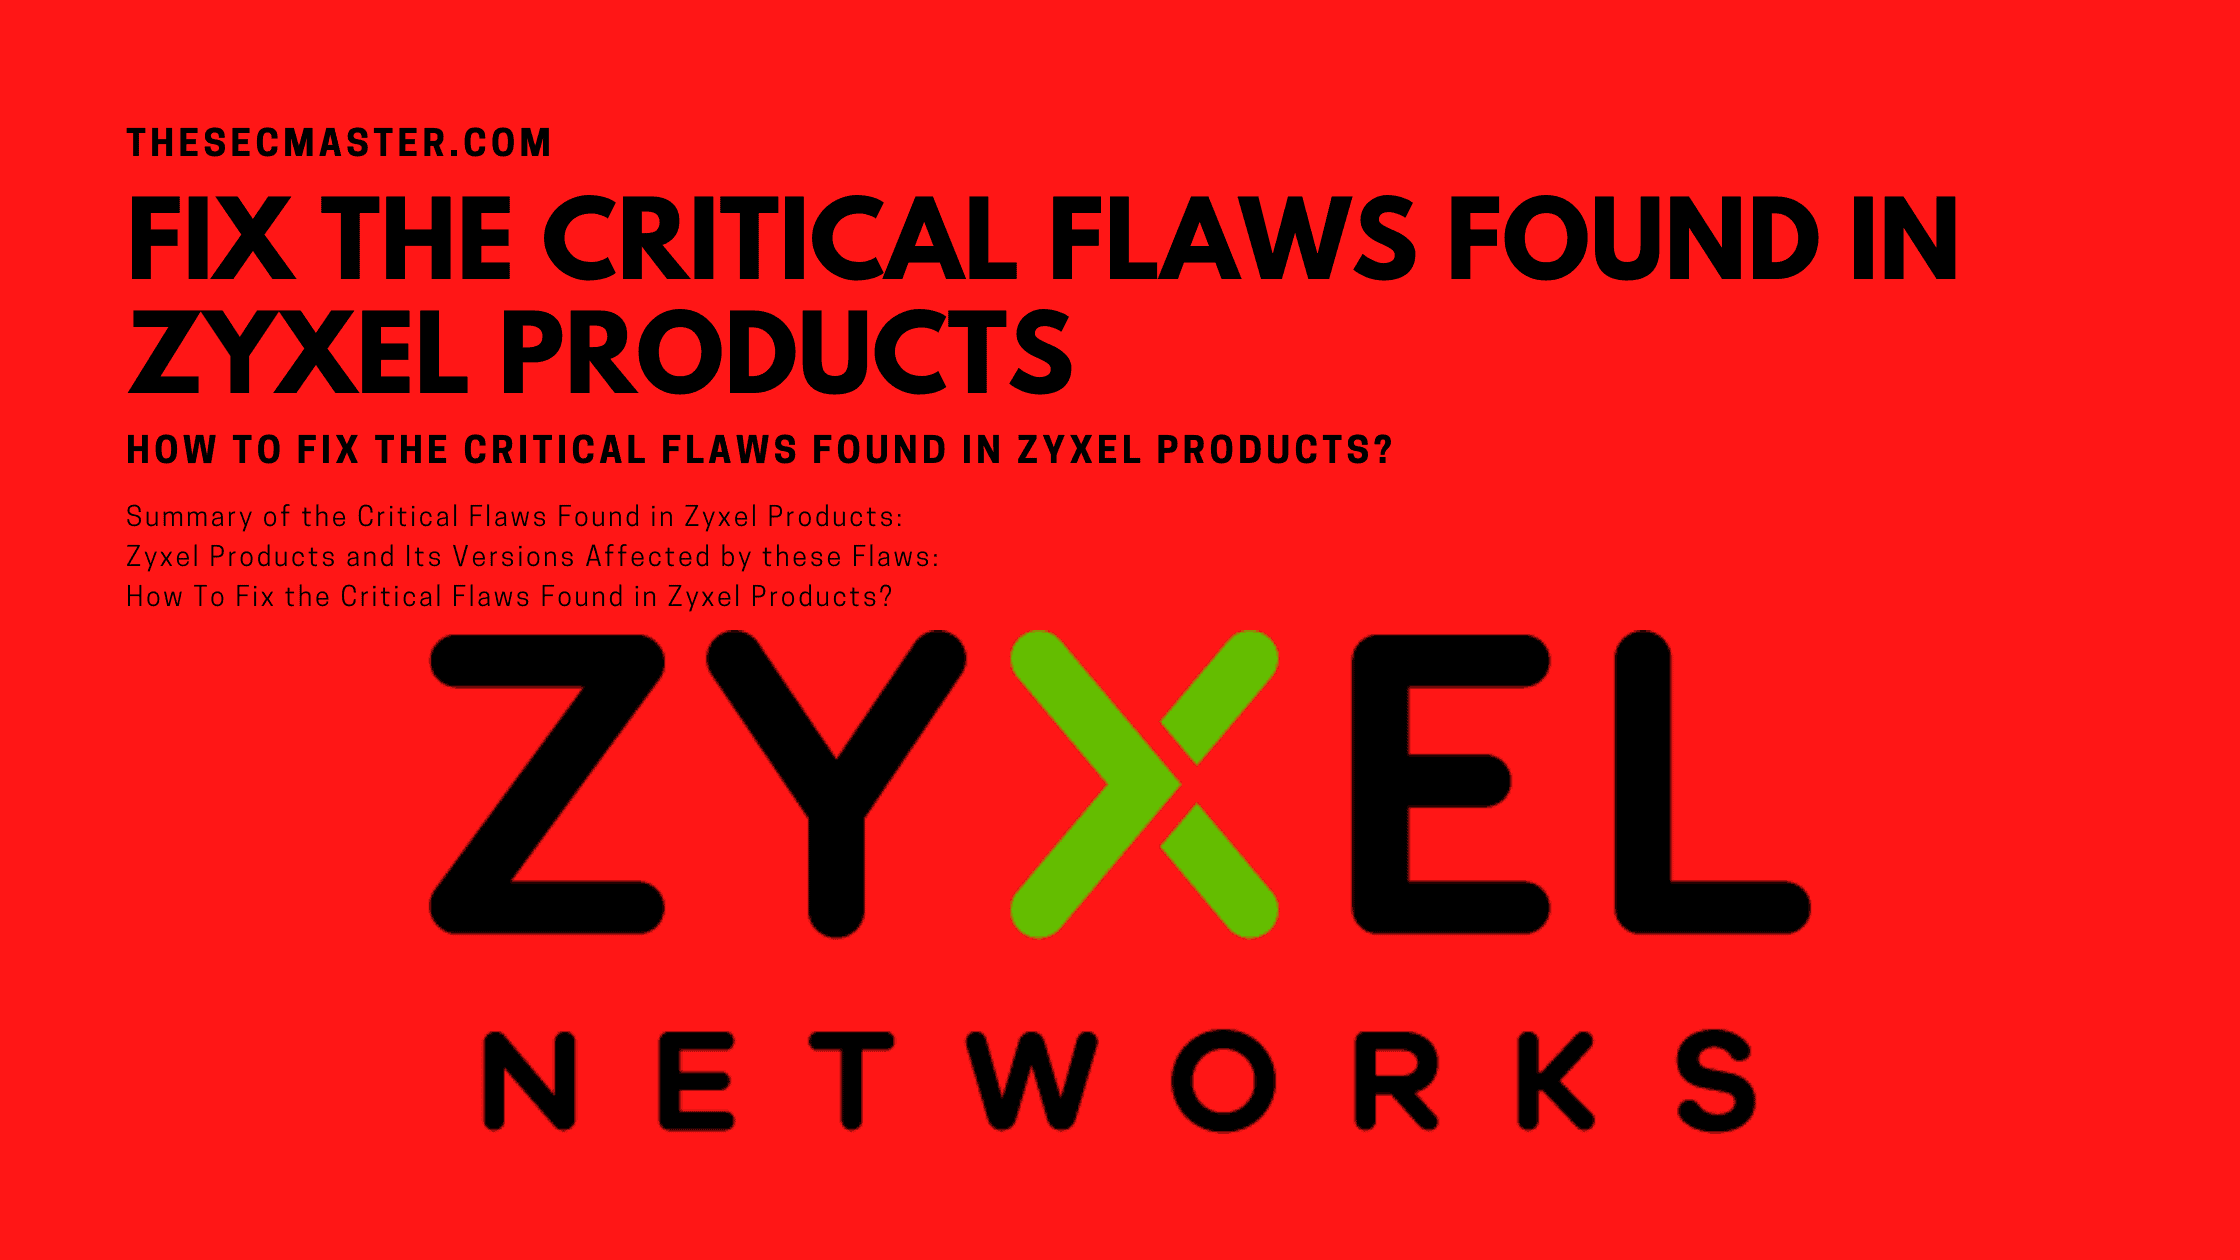 Fix The Critical Flaws Found In Zyxel Products